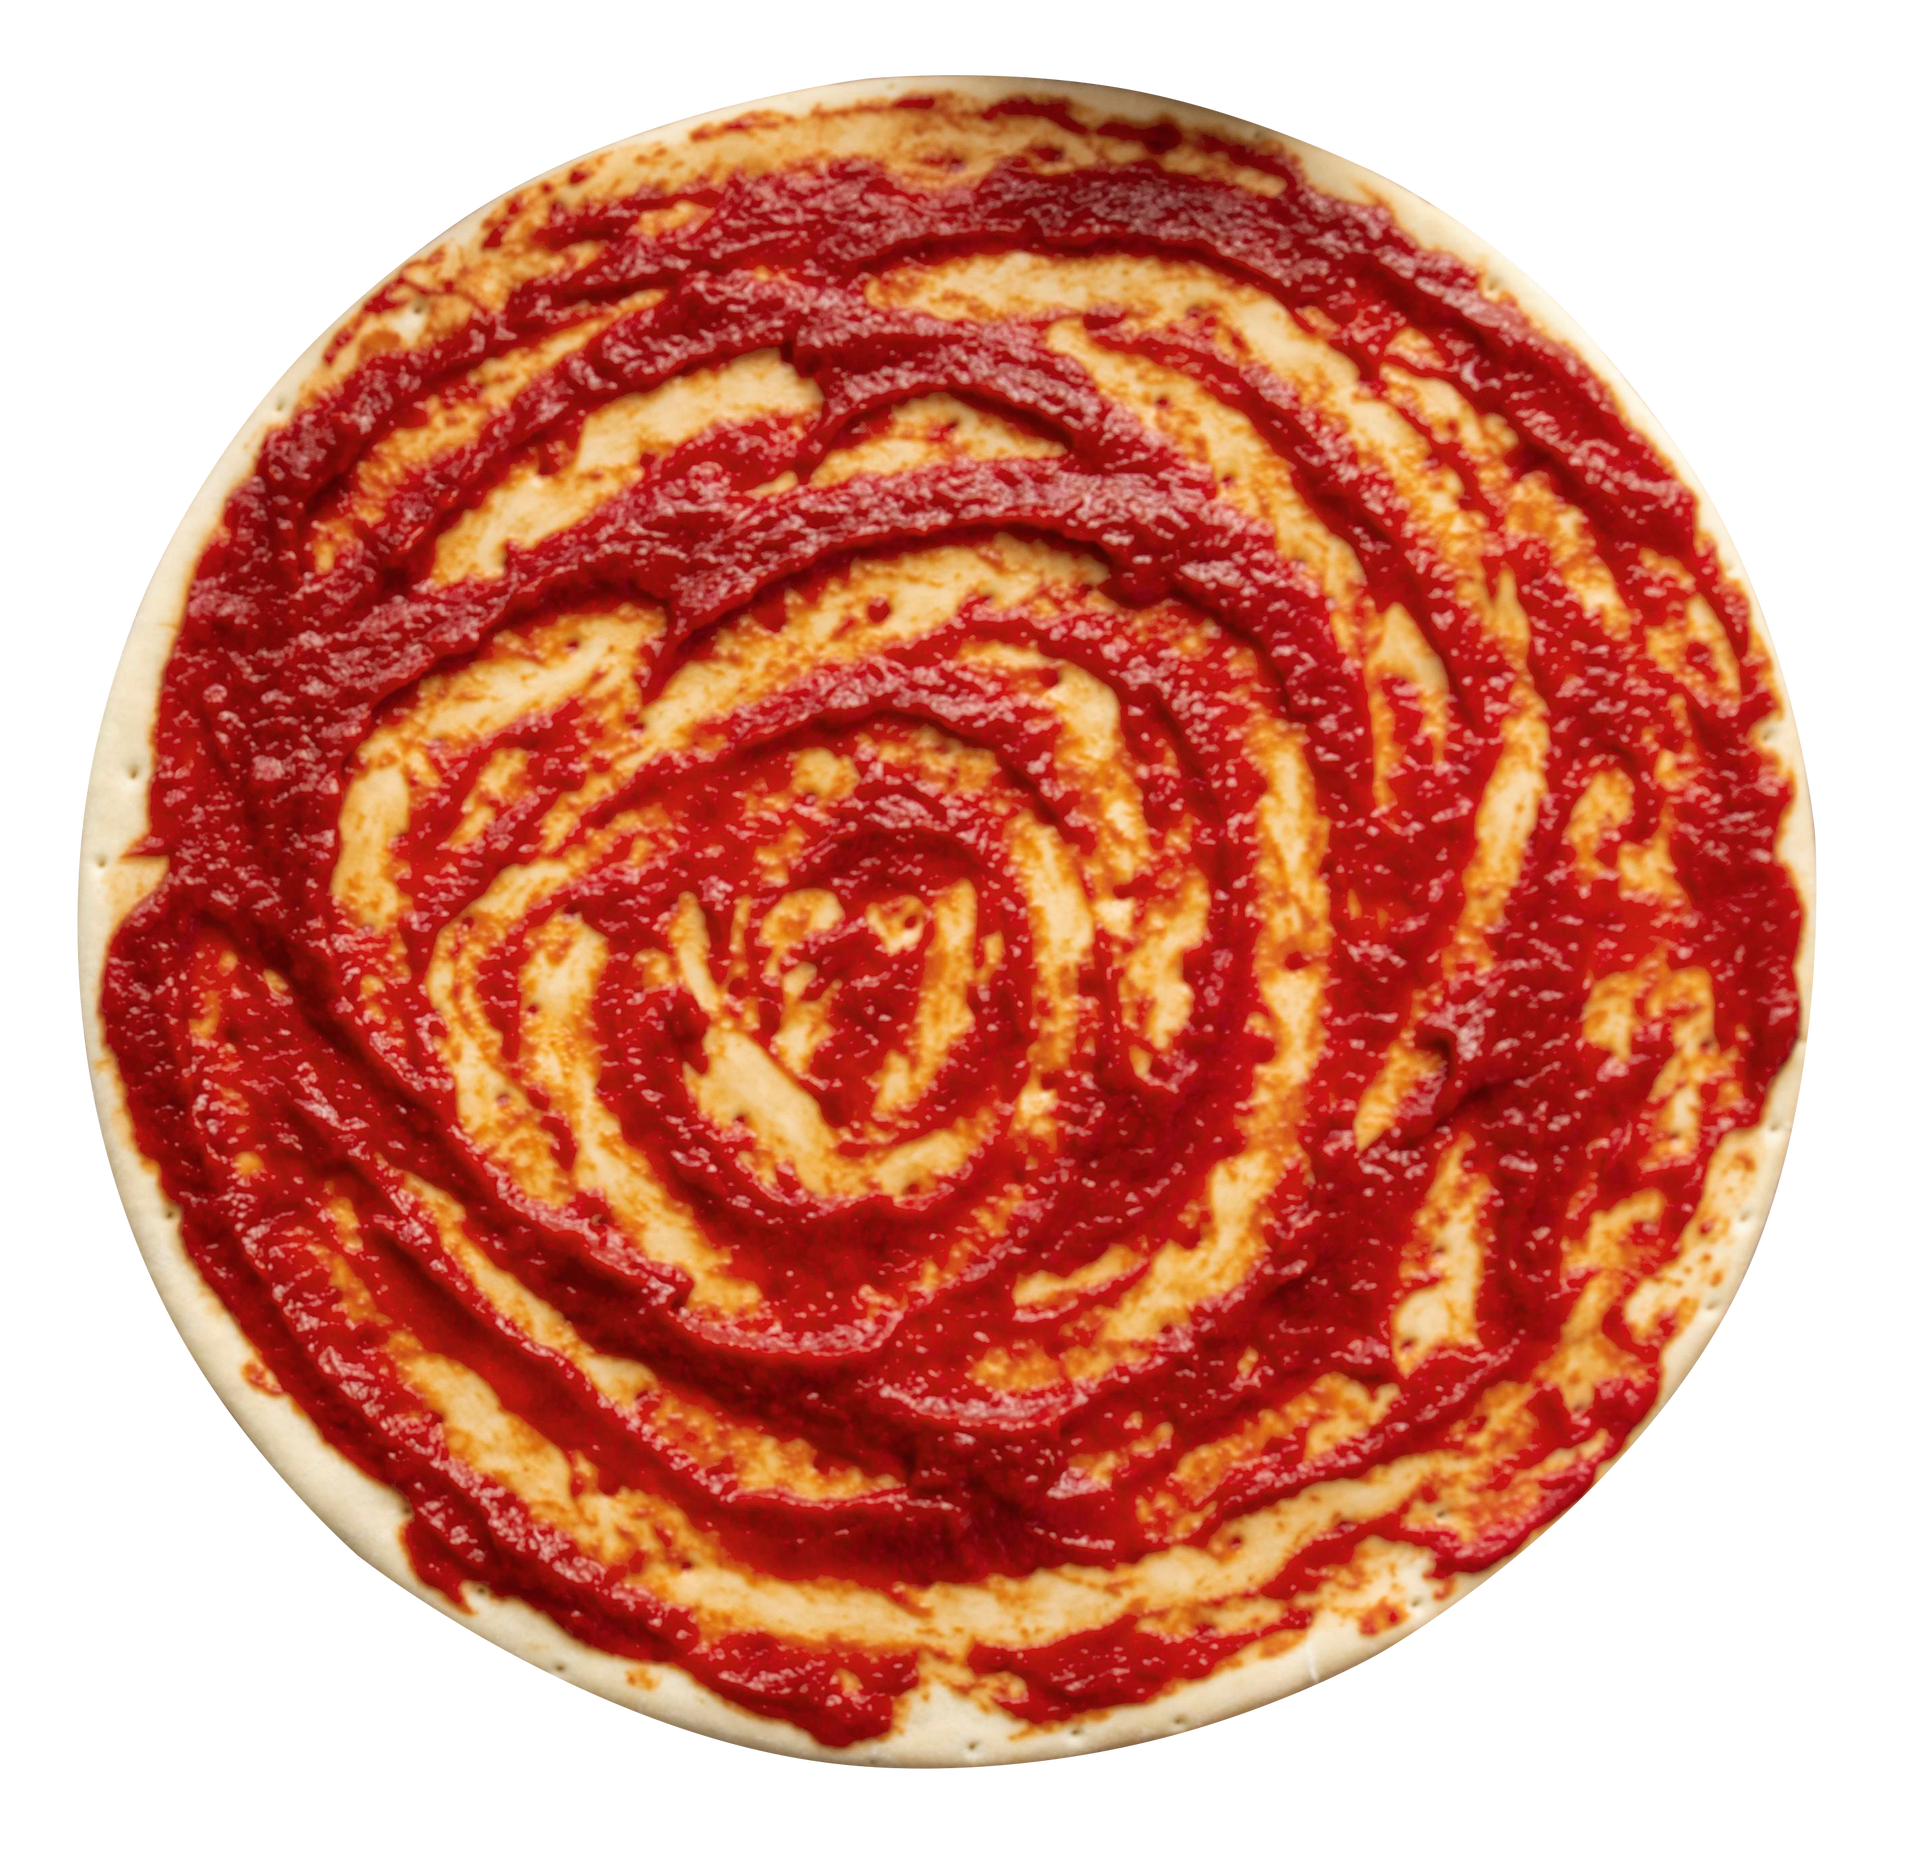 A pizza with a swirl of tomato sauce on it